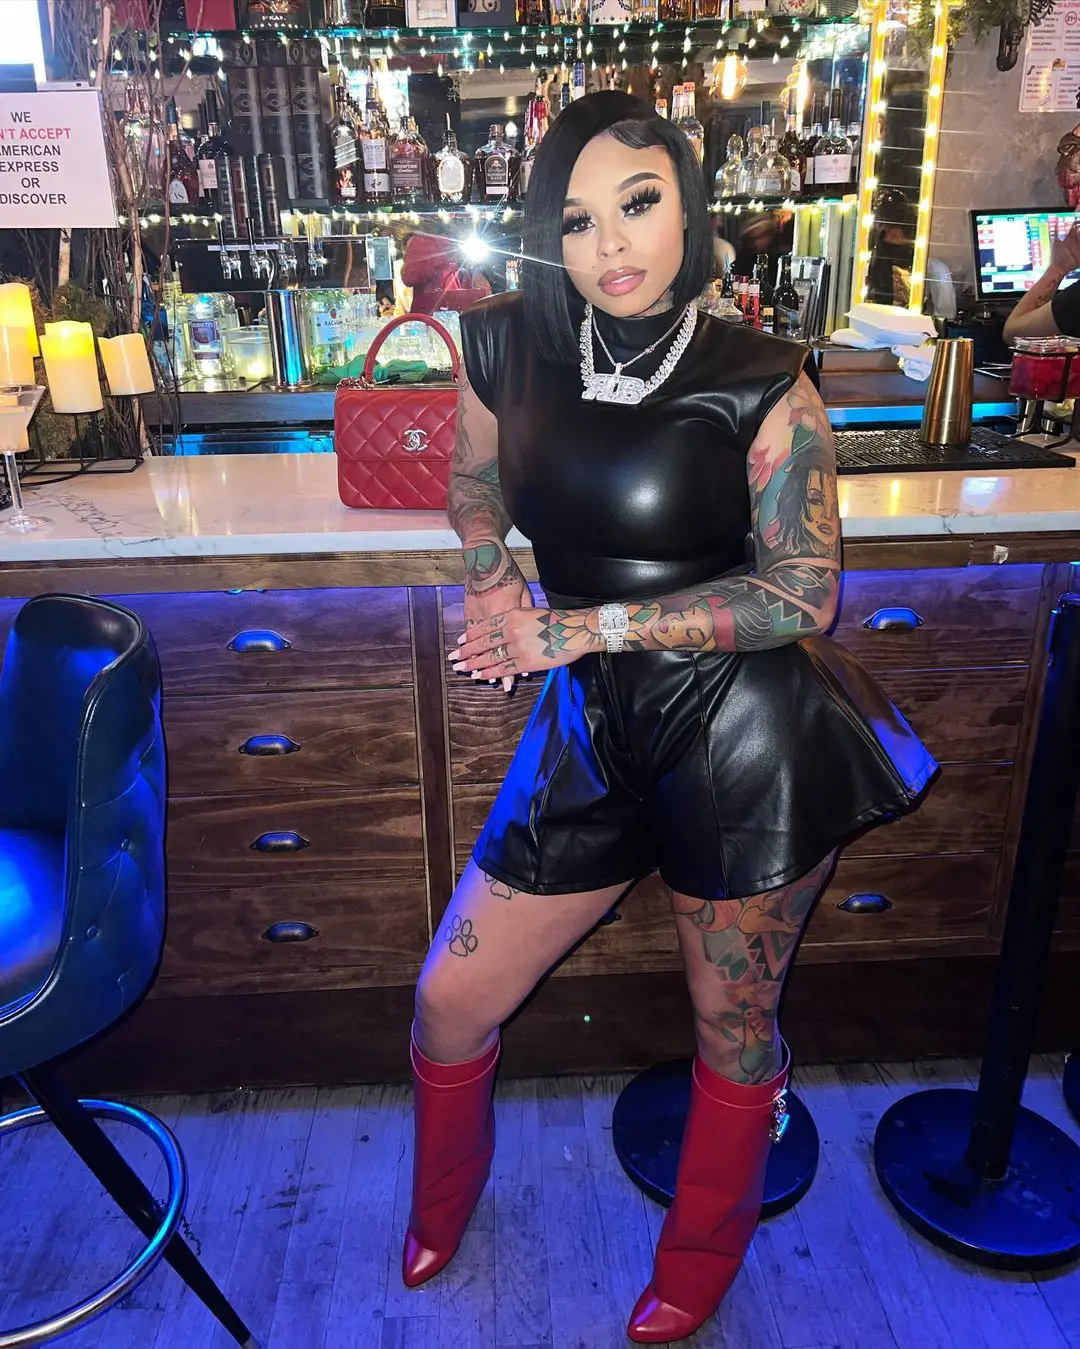 Razor in a bar in extravagant clothes, including a handbag and a Red long boot. She even wore jewelry like a ring and two necklaces. 